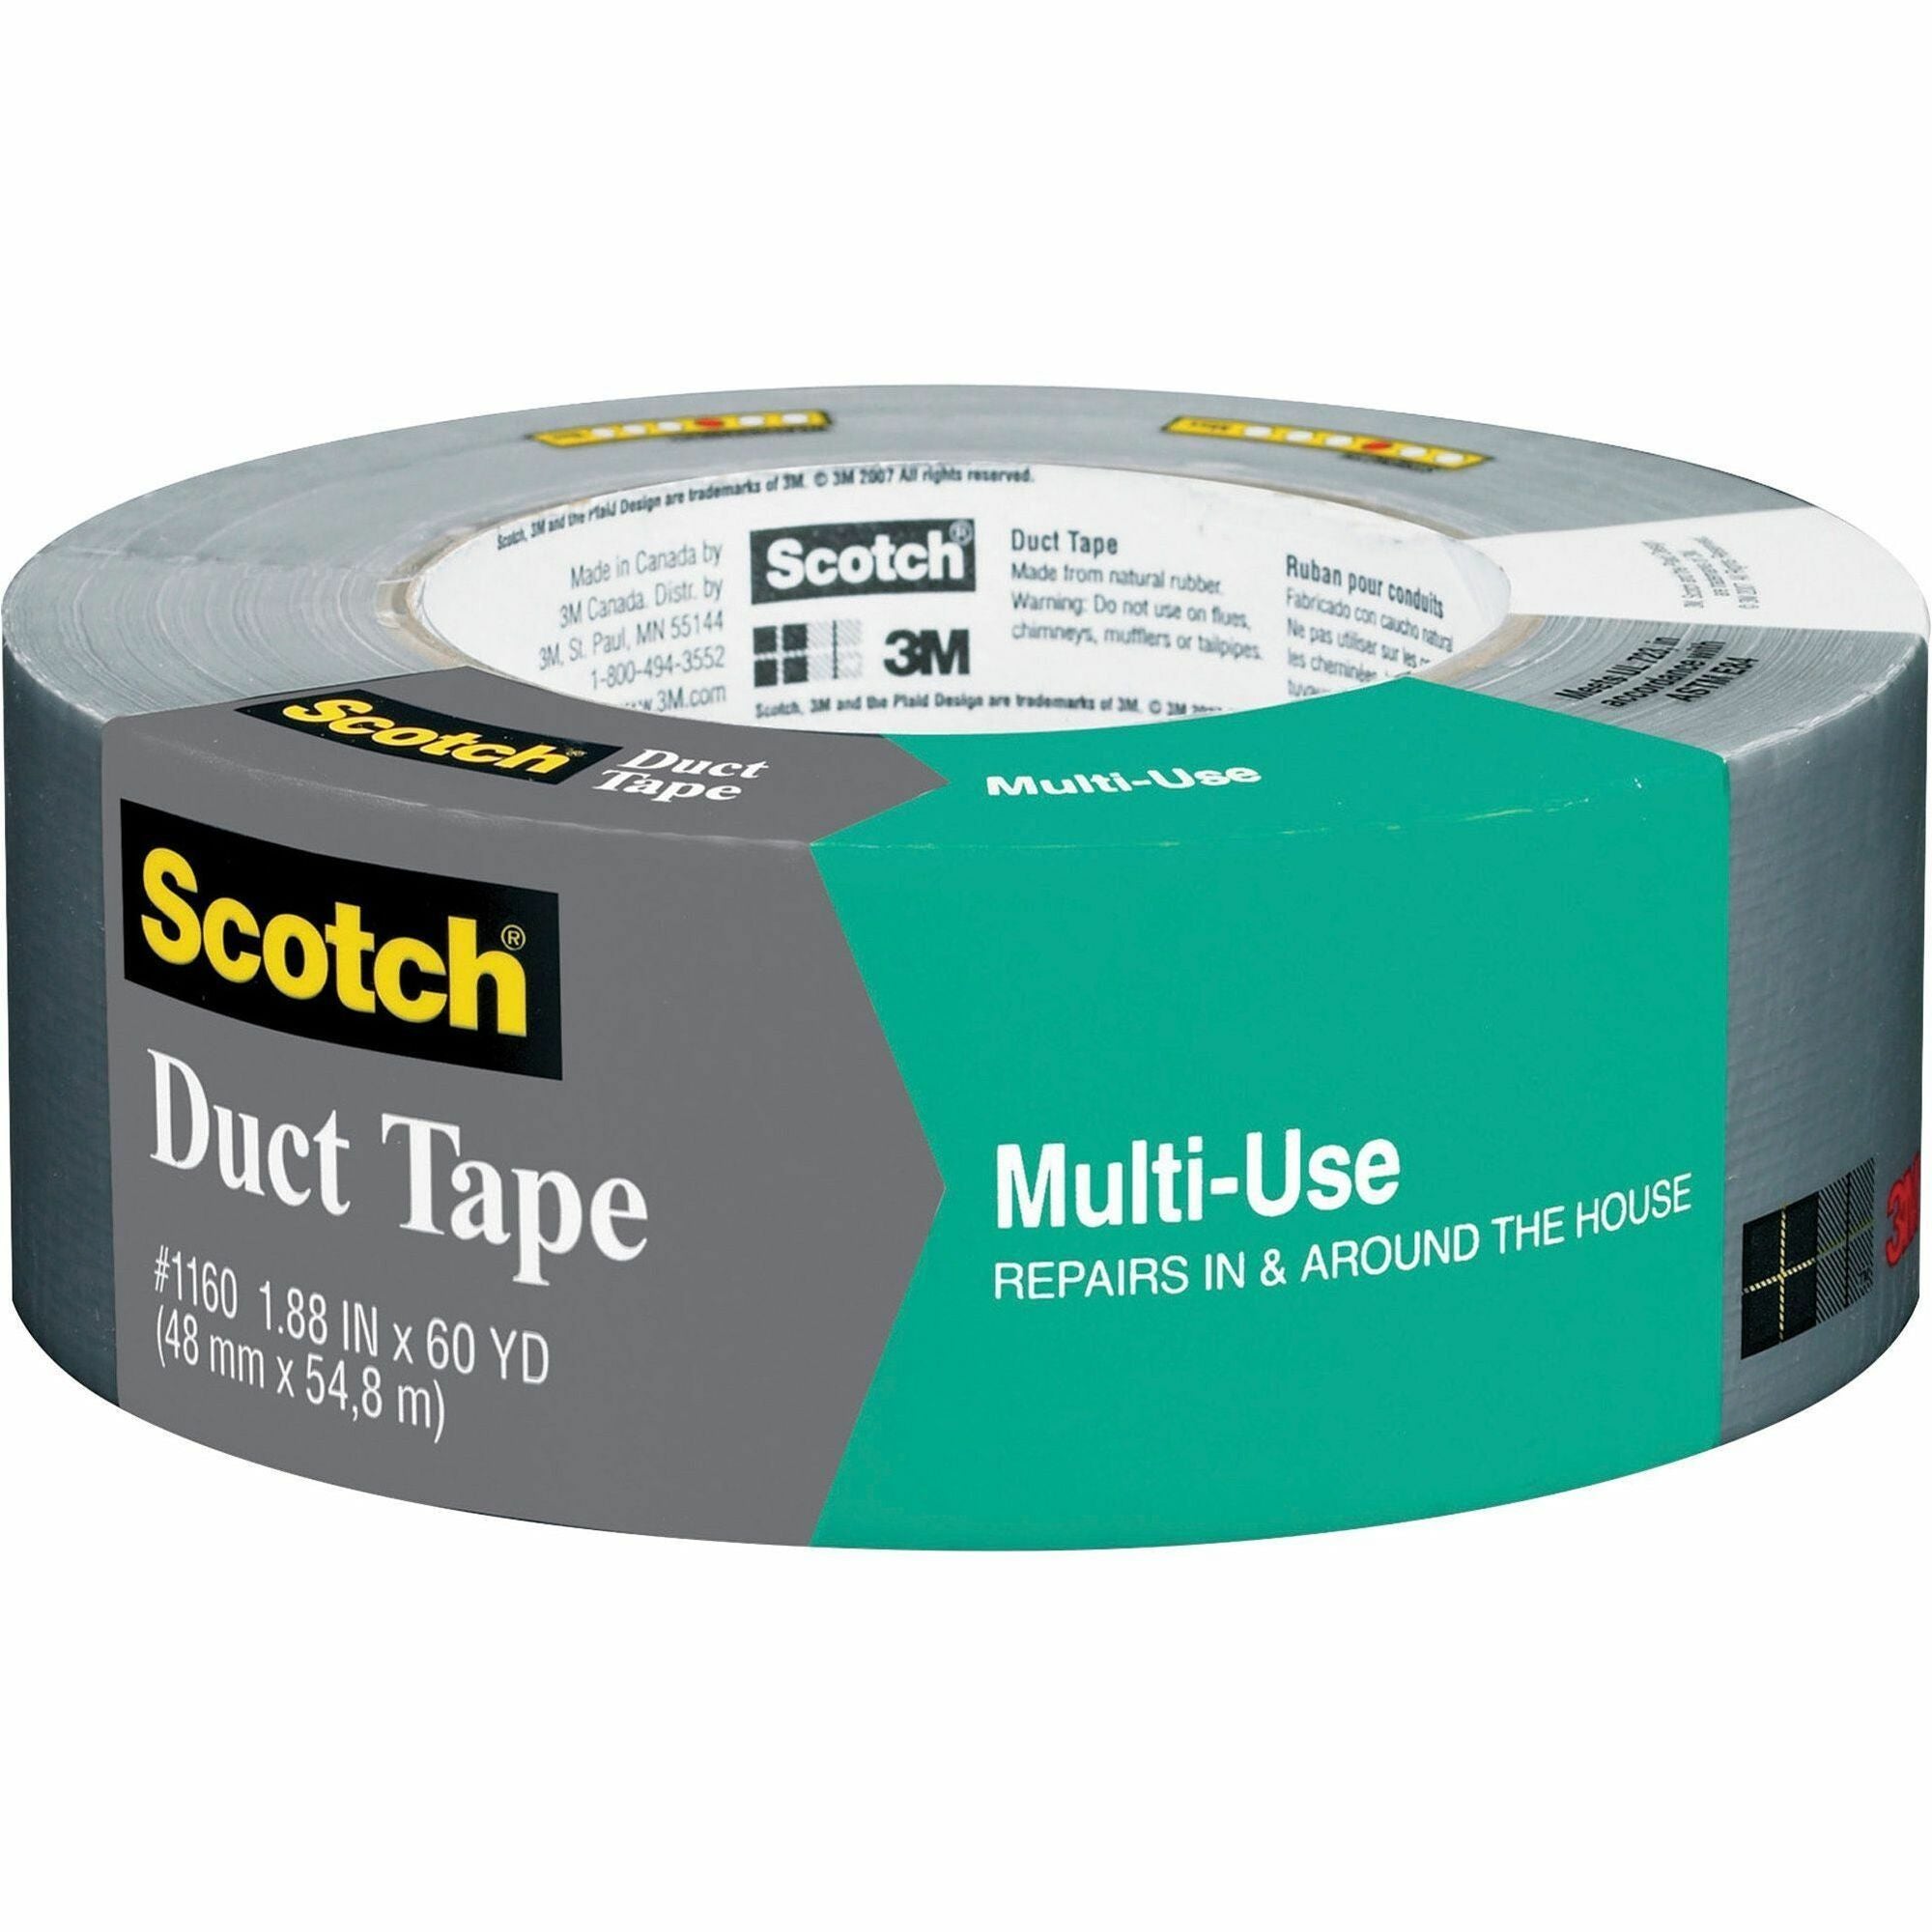 Scotch Multi-Use Duct Tape - 60 yd Length x 1.88" Width - 3" Core - Water Proof - For Repairing, Wrapping, Multipurpose - 1 / Roll - Gray - 